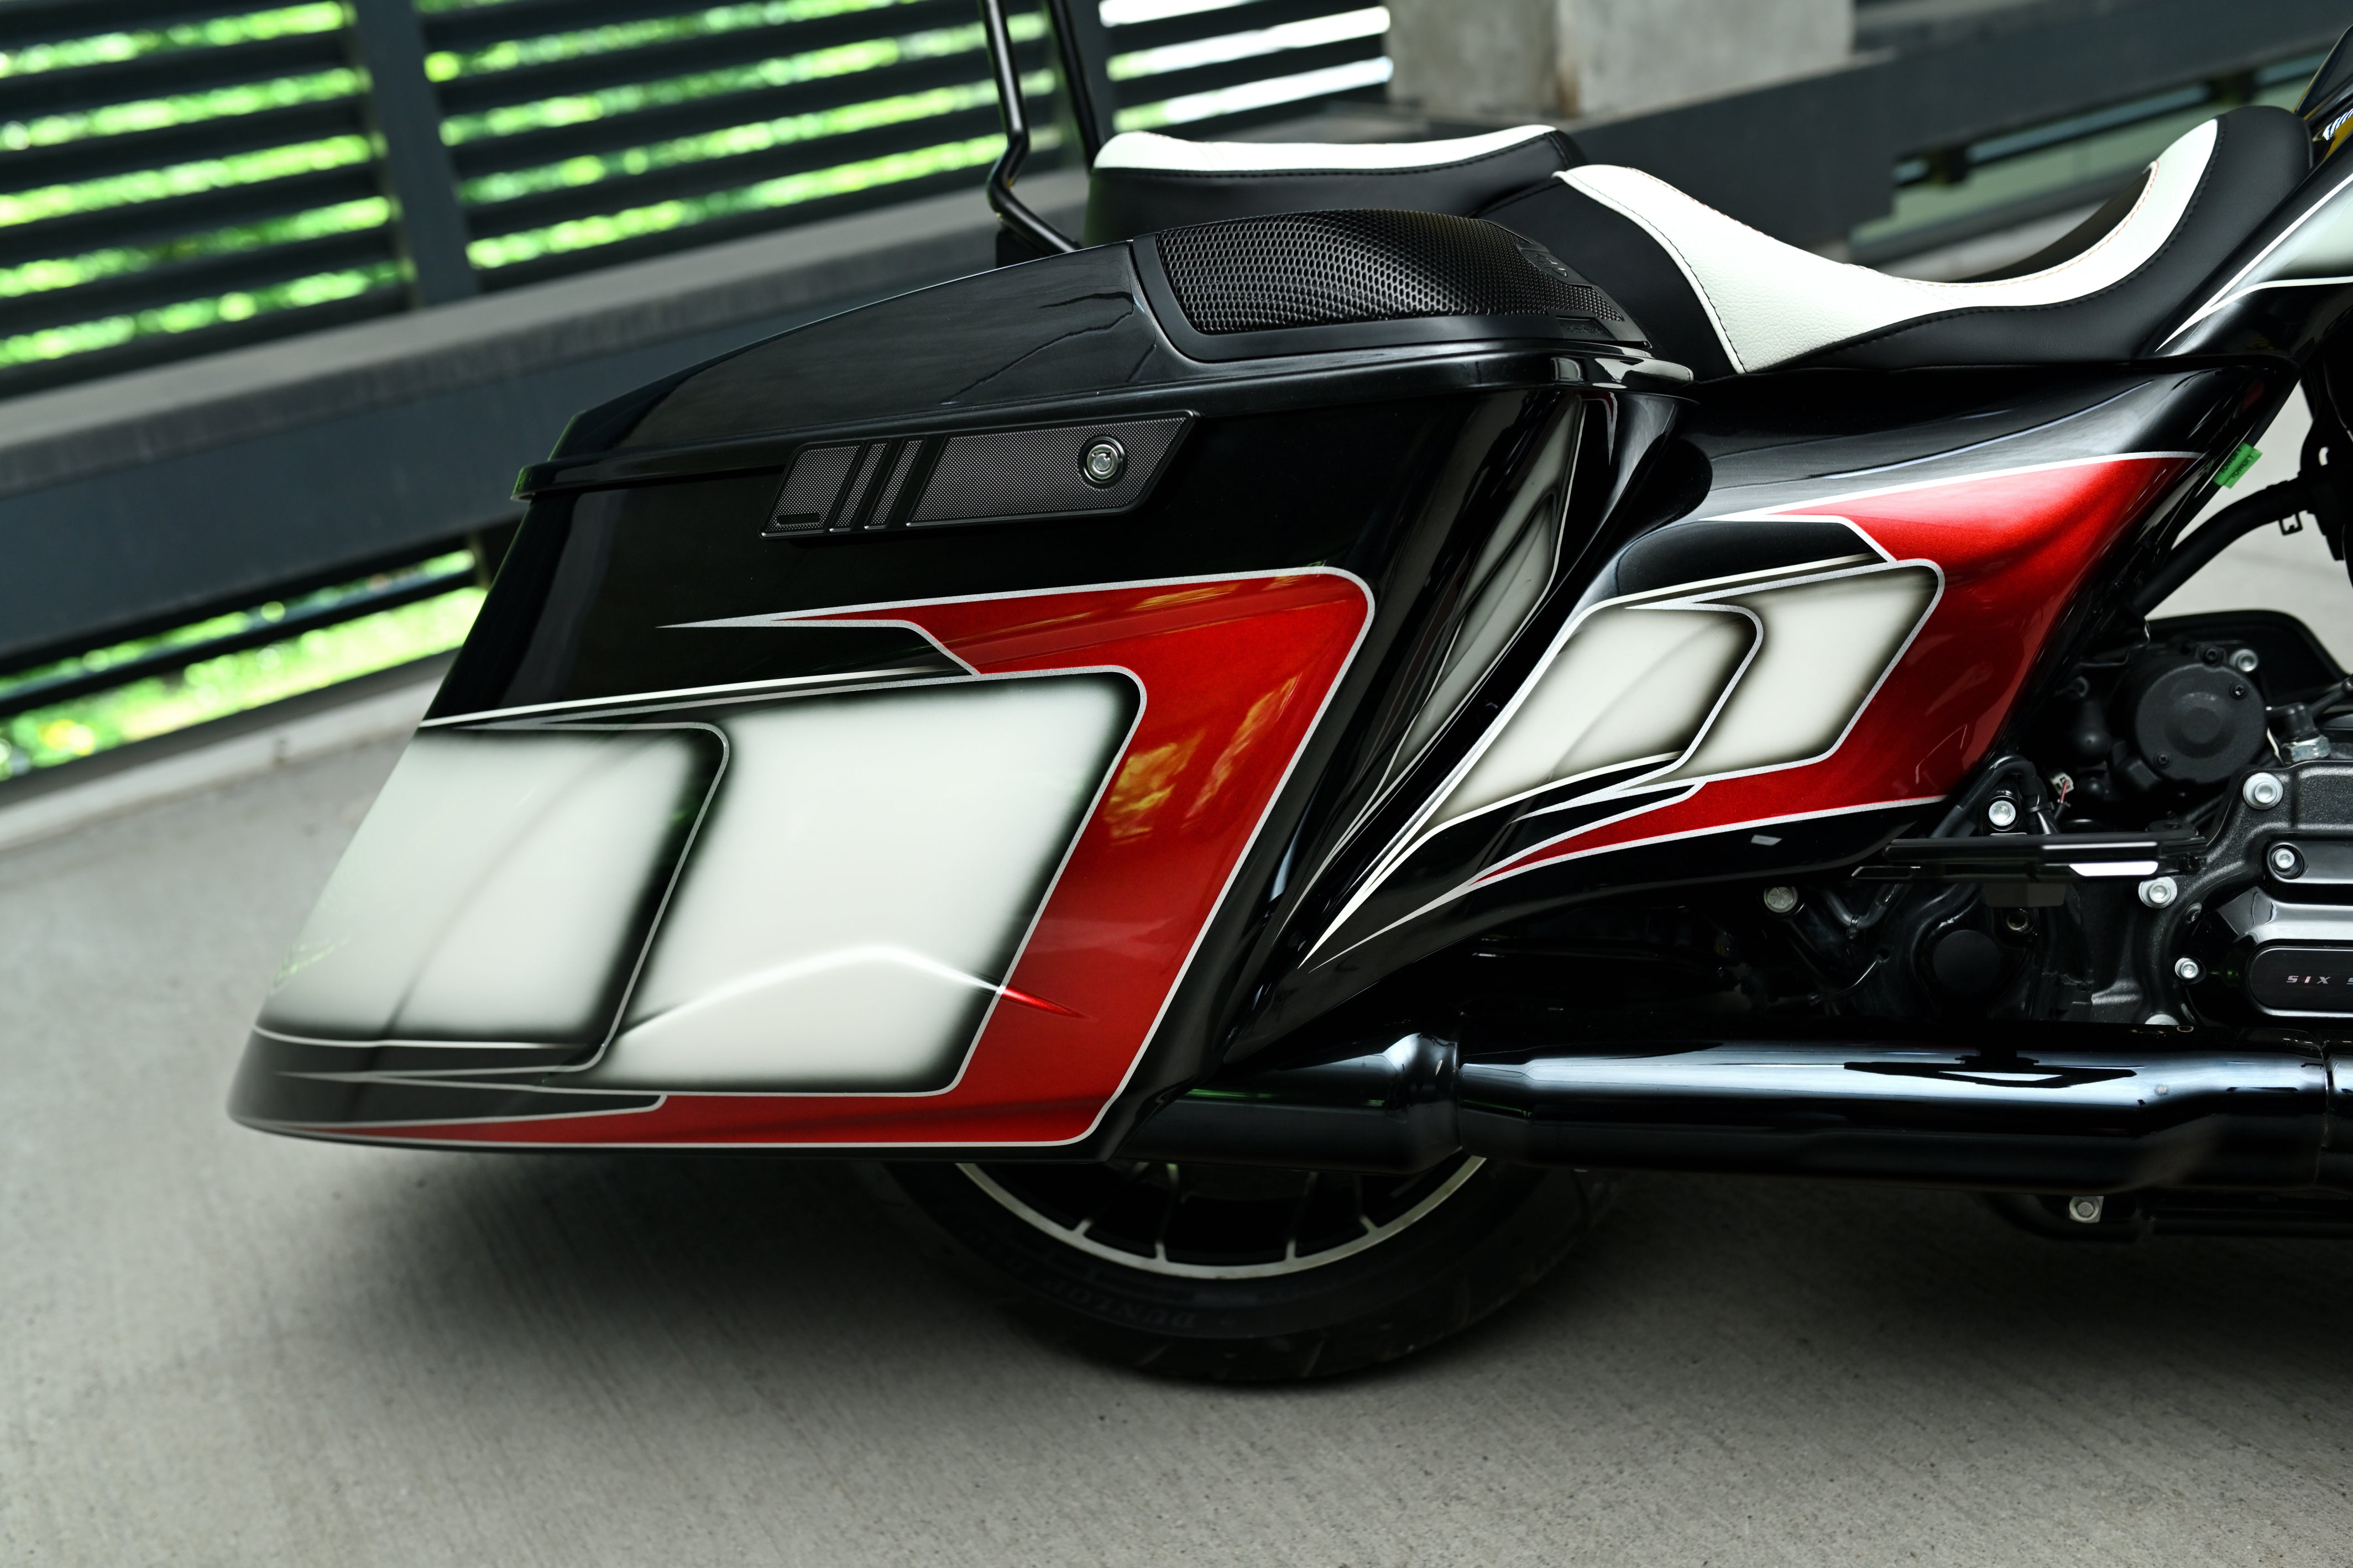 Morocco Style Stretched Side Covers for Harley Davidson Touring 2014 up models - Tommy&Sons